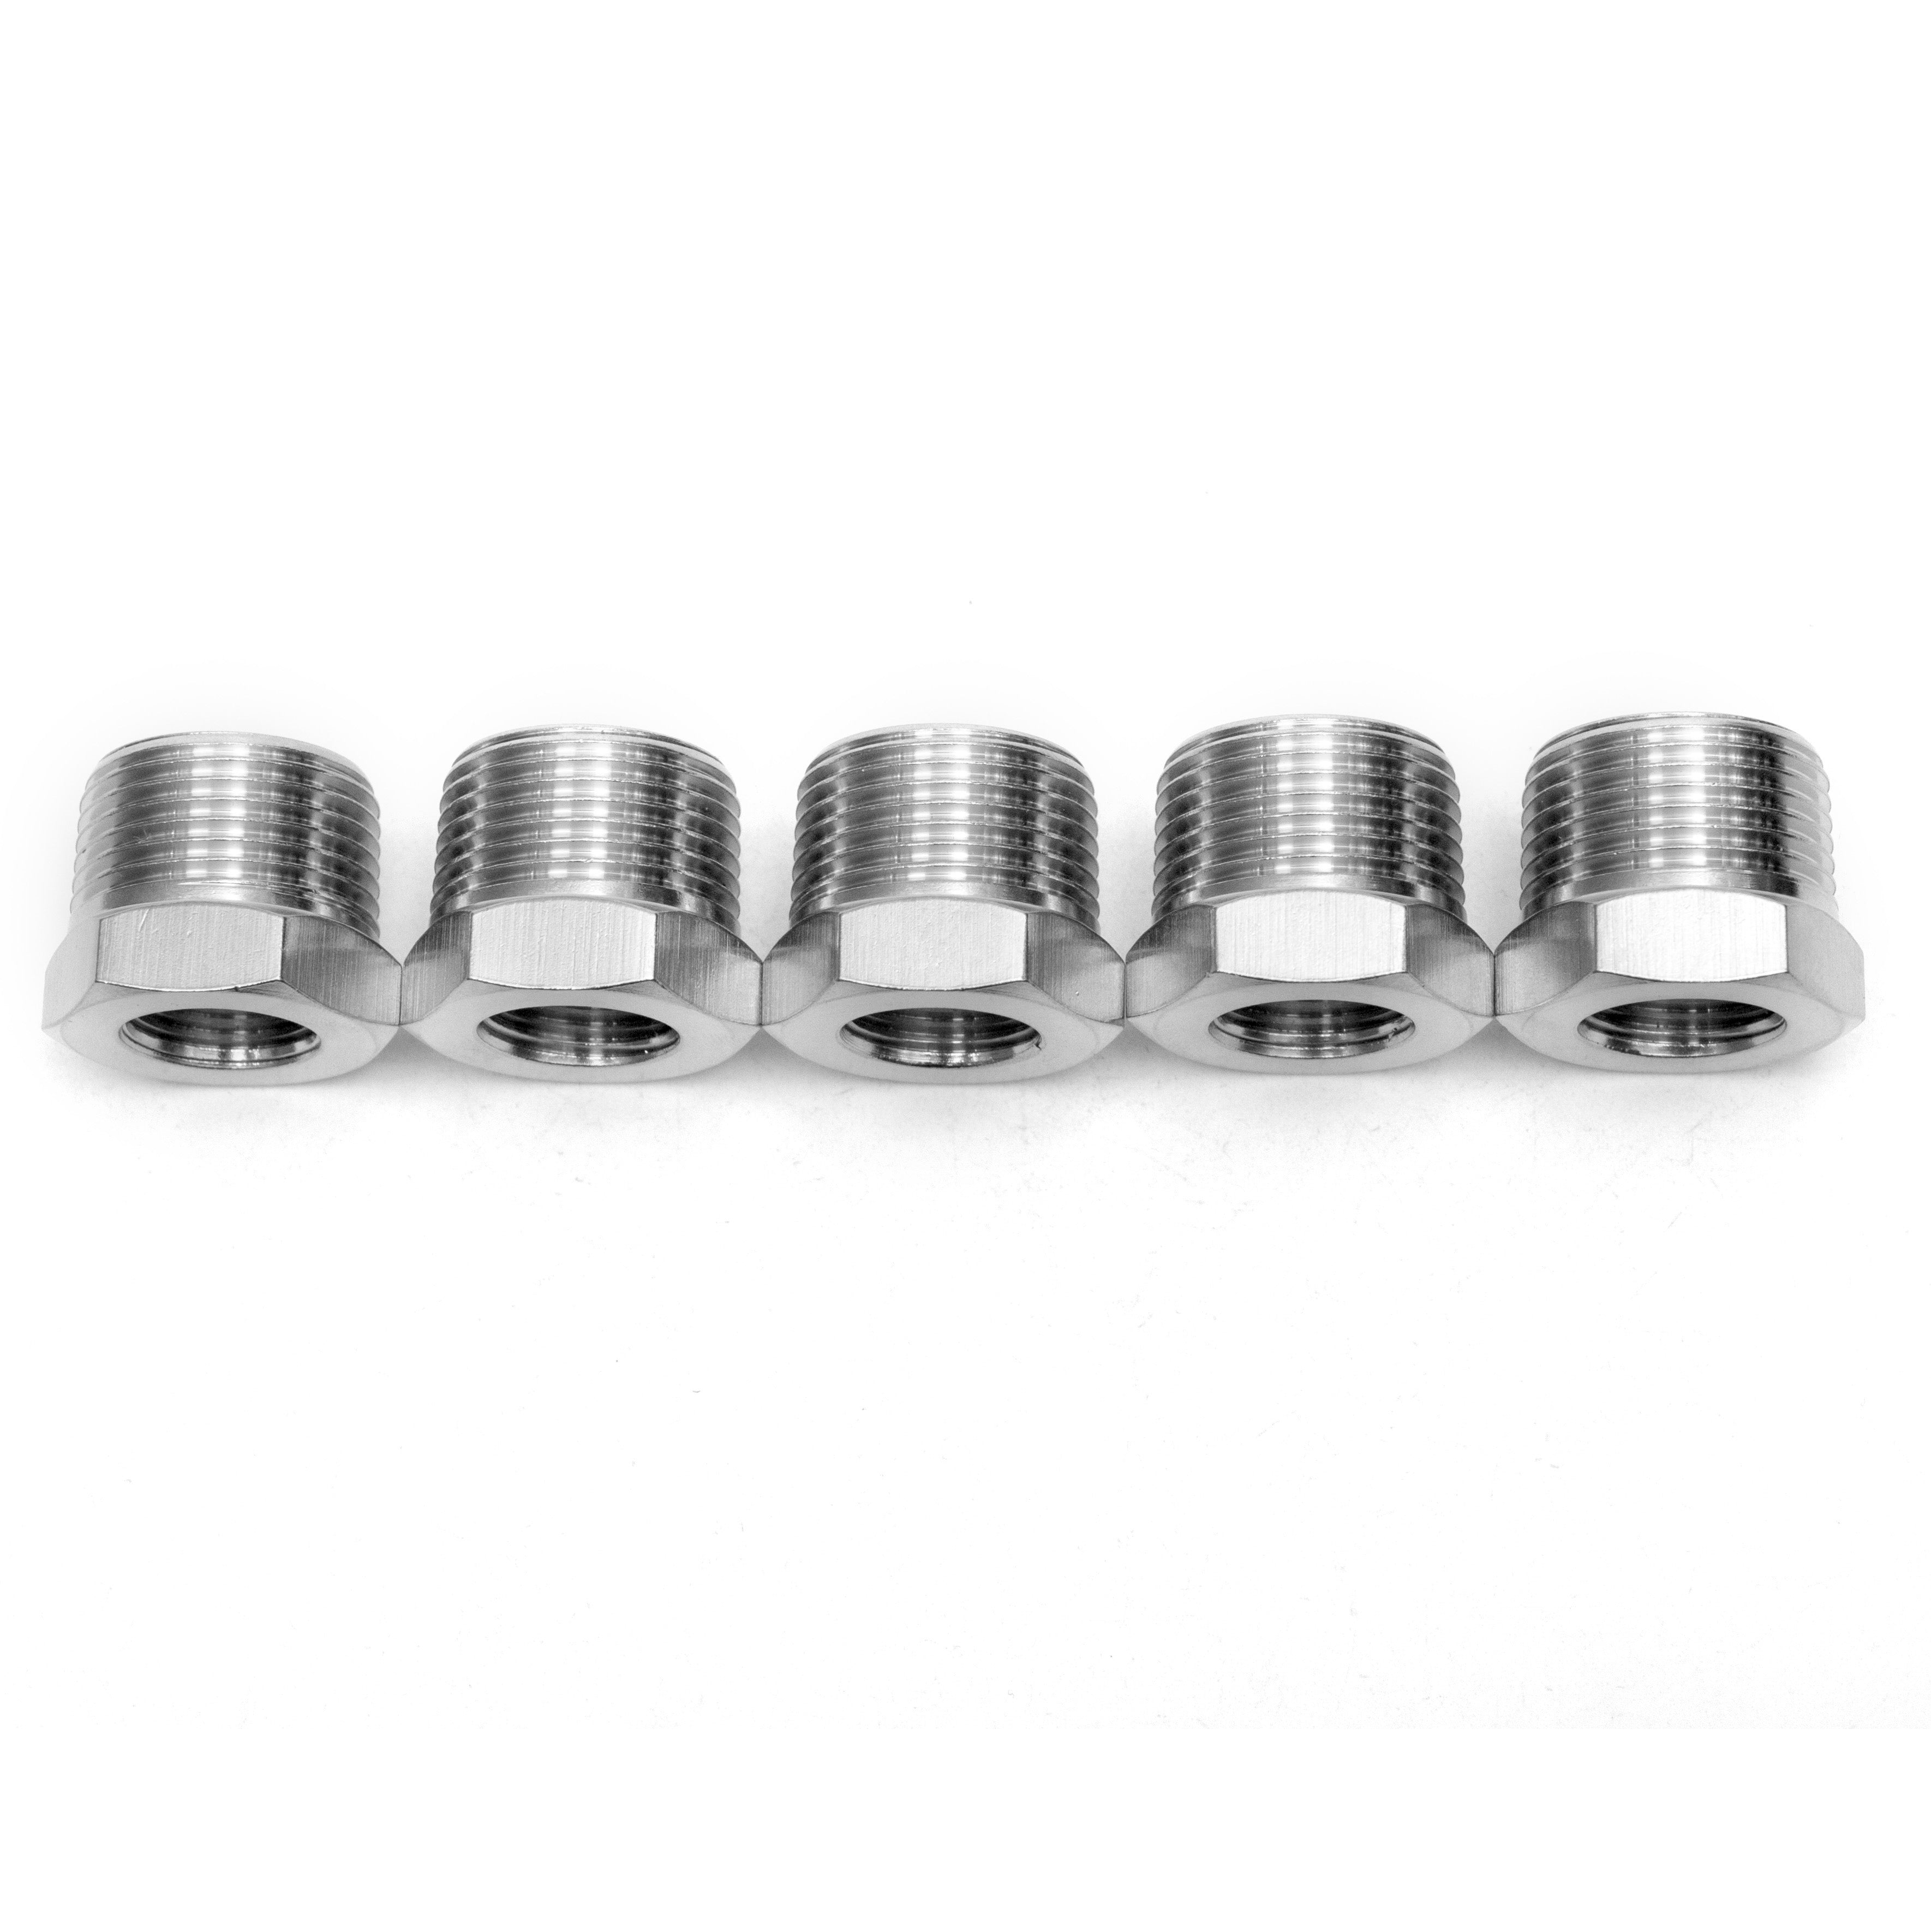 LTWFITTING Bar Production Stainless Steel 316 Pipe Hex Bushing Reducer Fittings 3/4 Inch Male x 3/8 Inch Female NPT Fuel Water Boat (Pack of 5)